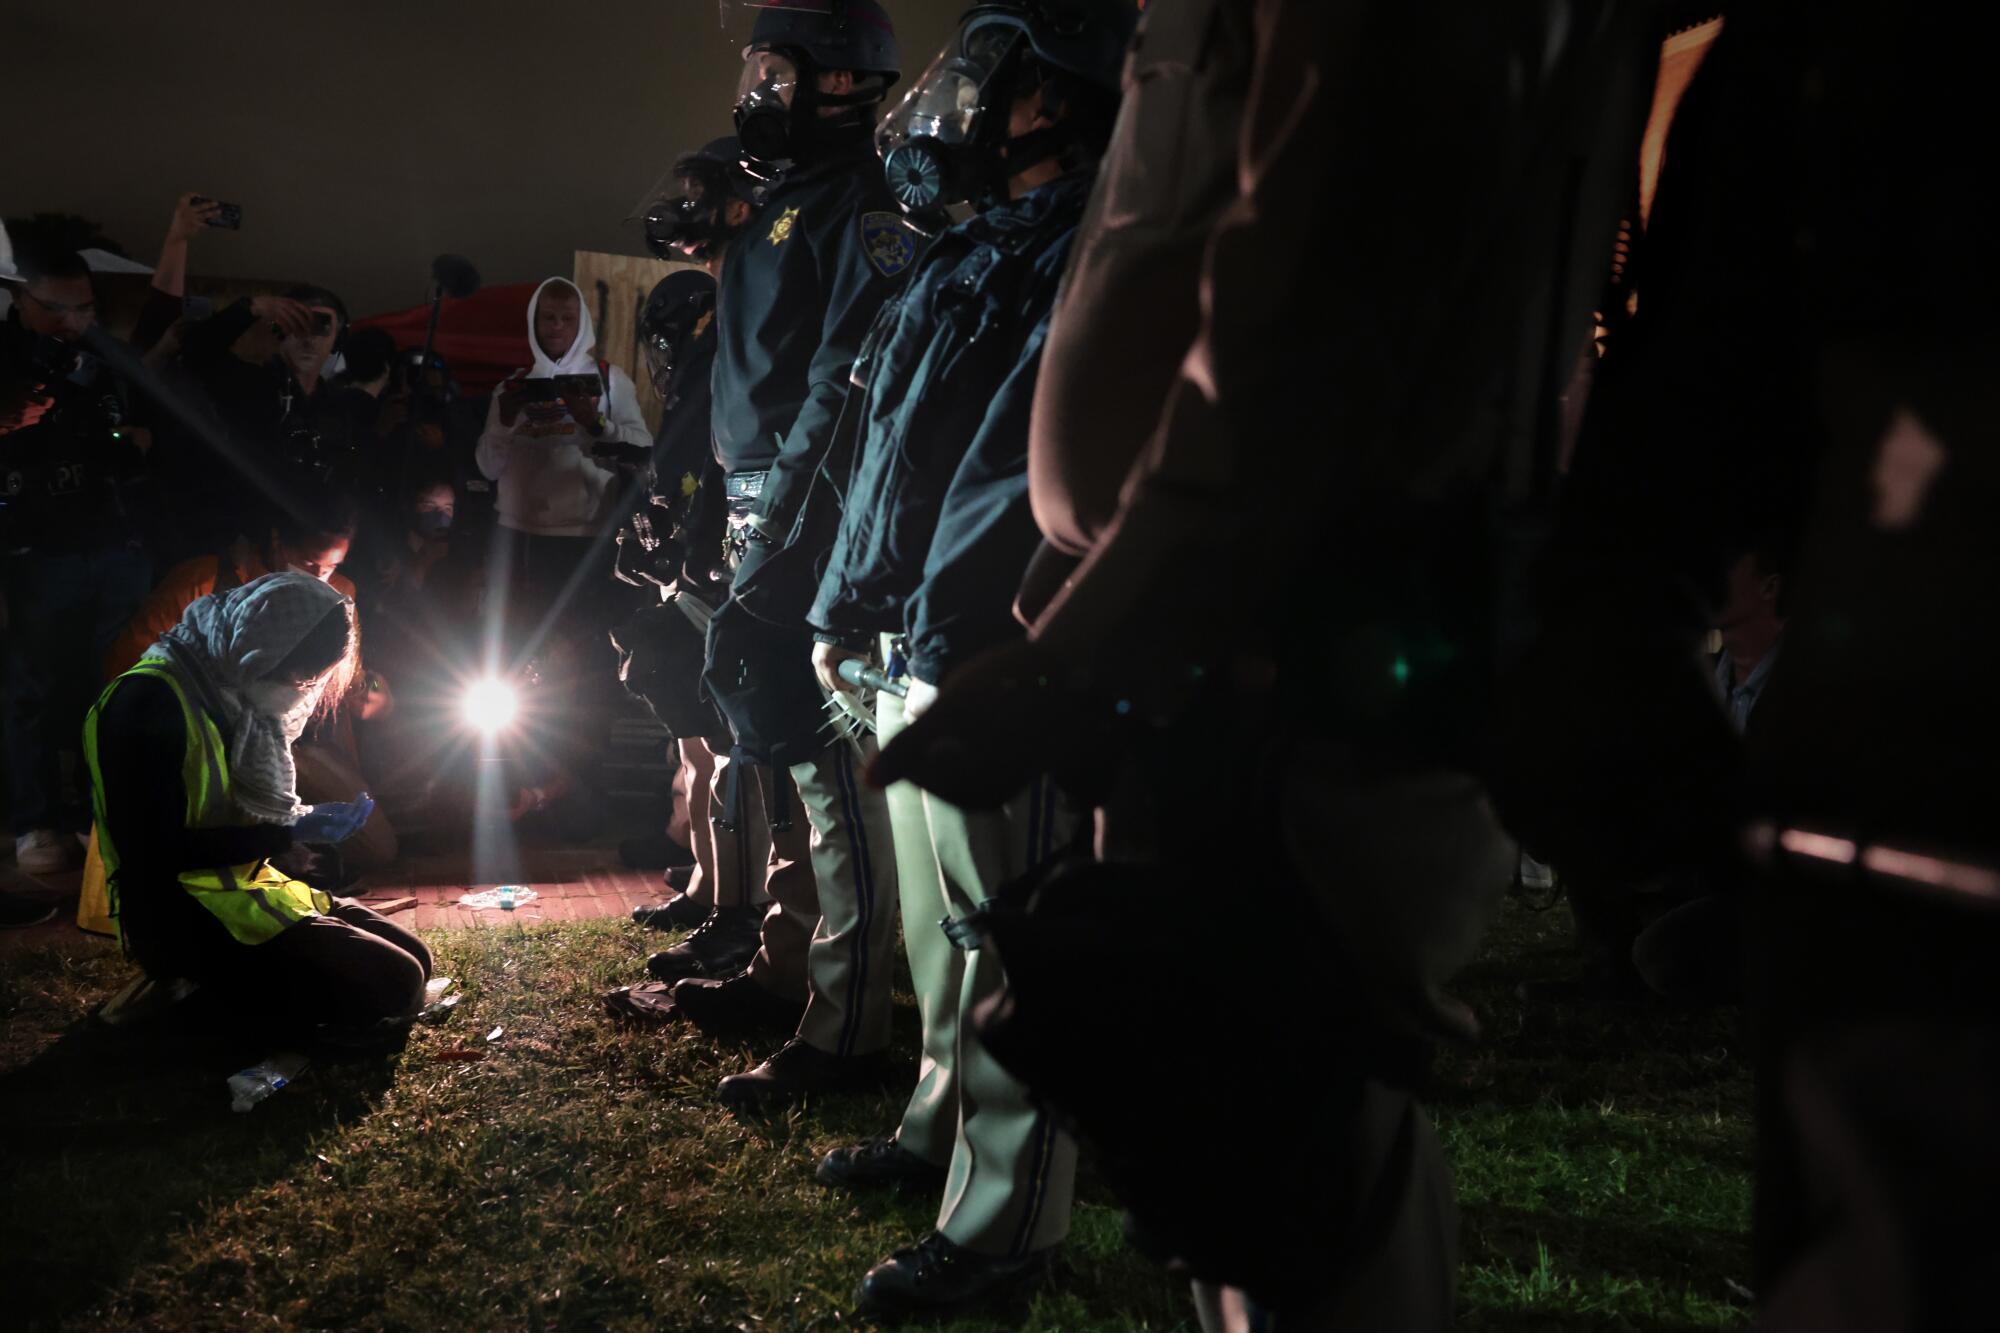 A woman prays in front of CHP officers next to the pro-Palestinian encampment at UCLA early Wednesday morning.